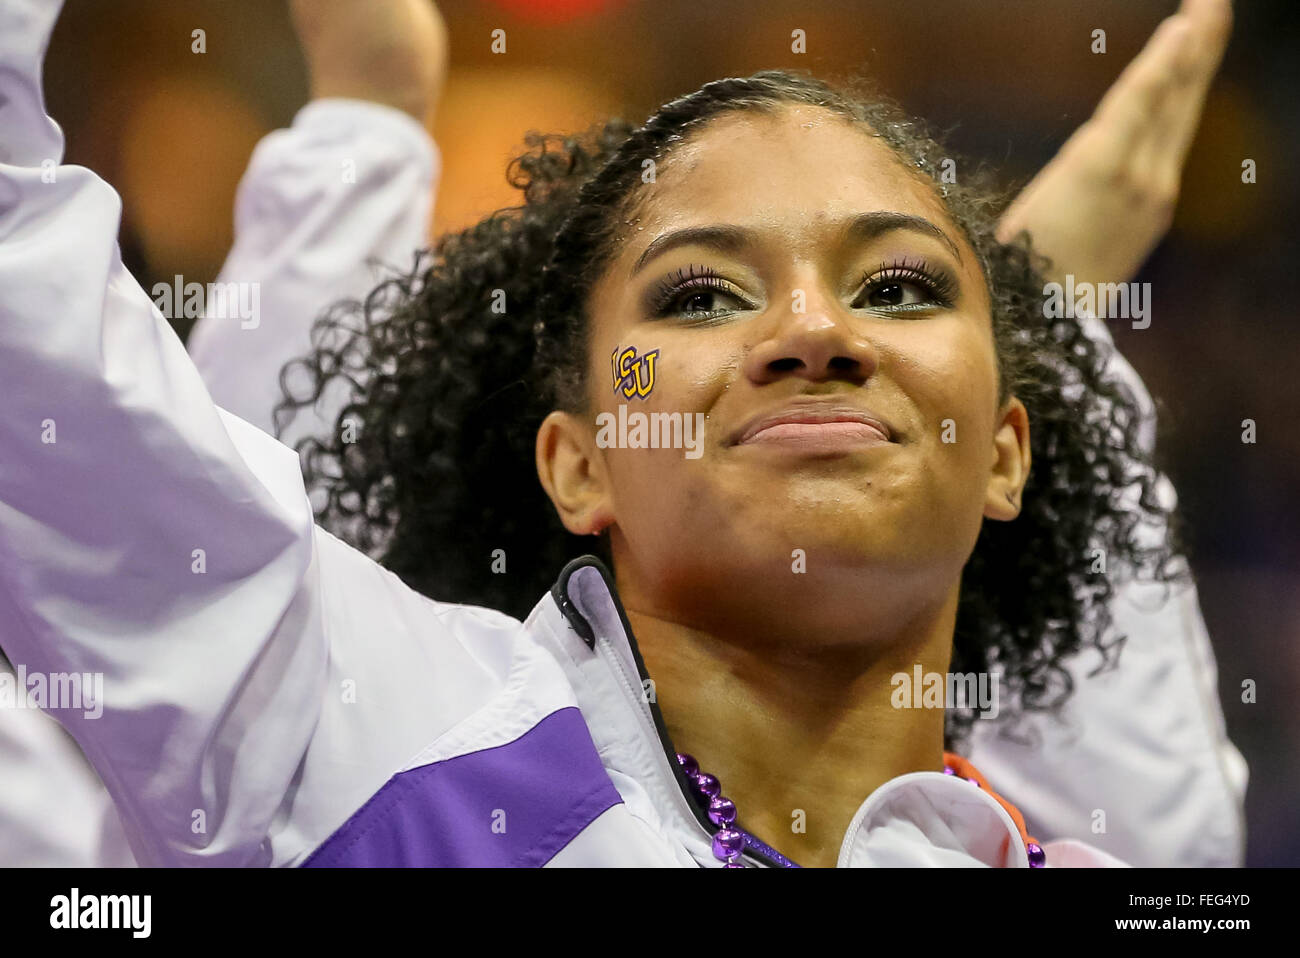 Baton Rouge, LA, USA. 05th Feb, 2016. LSU Tigers Randii Wyrick raises her hands to the fans after winning the meet after a NCAA gymnastics meet between the Arkansas Razorbacks at LSU Tigers at the Pete Maravich Assembly Center in Baton Rouge, LA. Stephen Lew/CSM/Alamy Live News Stock Photo